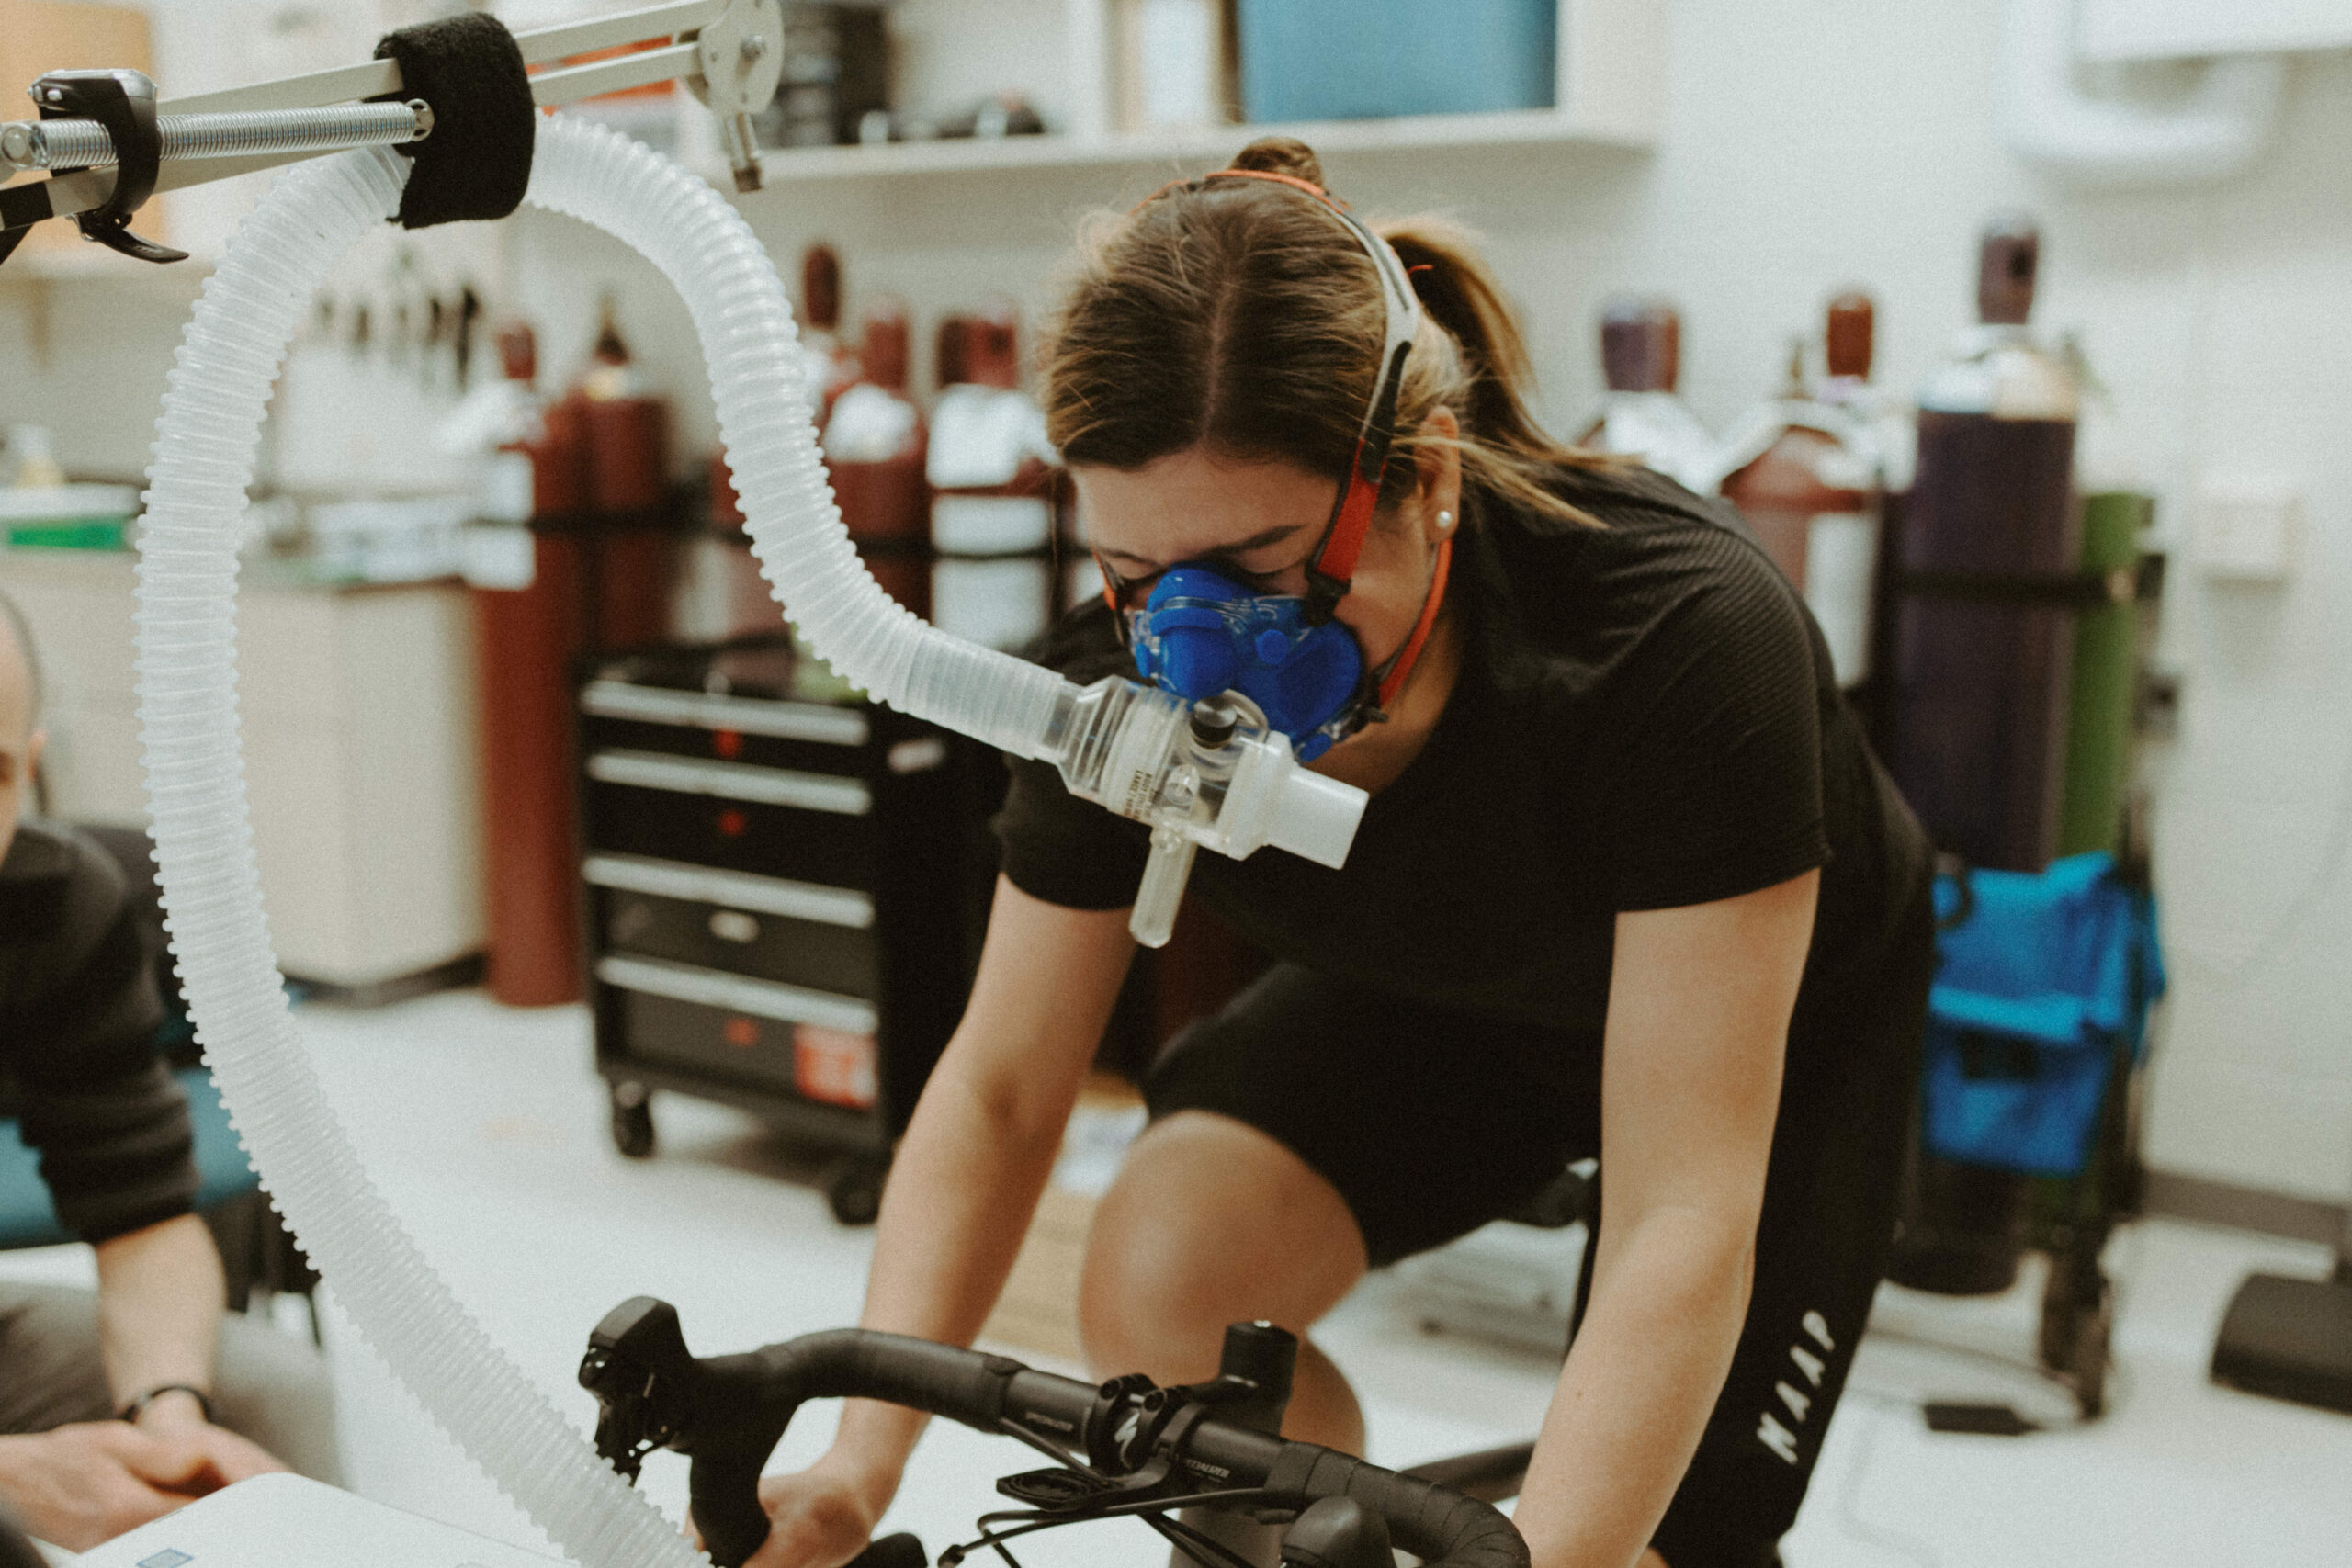 VO2Max Testing at the UBC Lab with DRKHORSE Physiology Studios